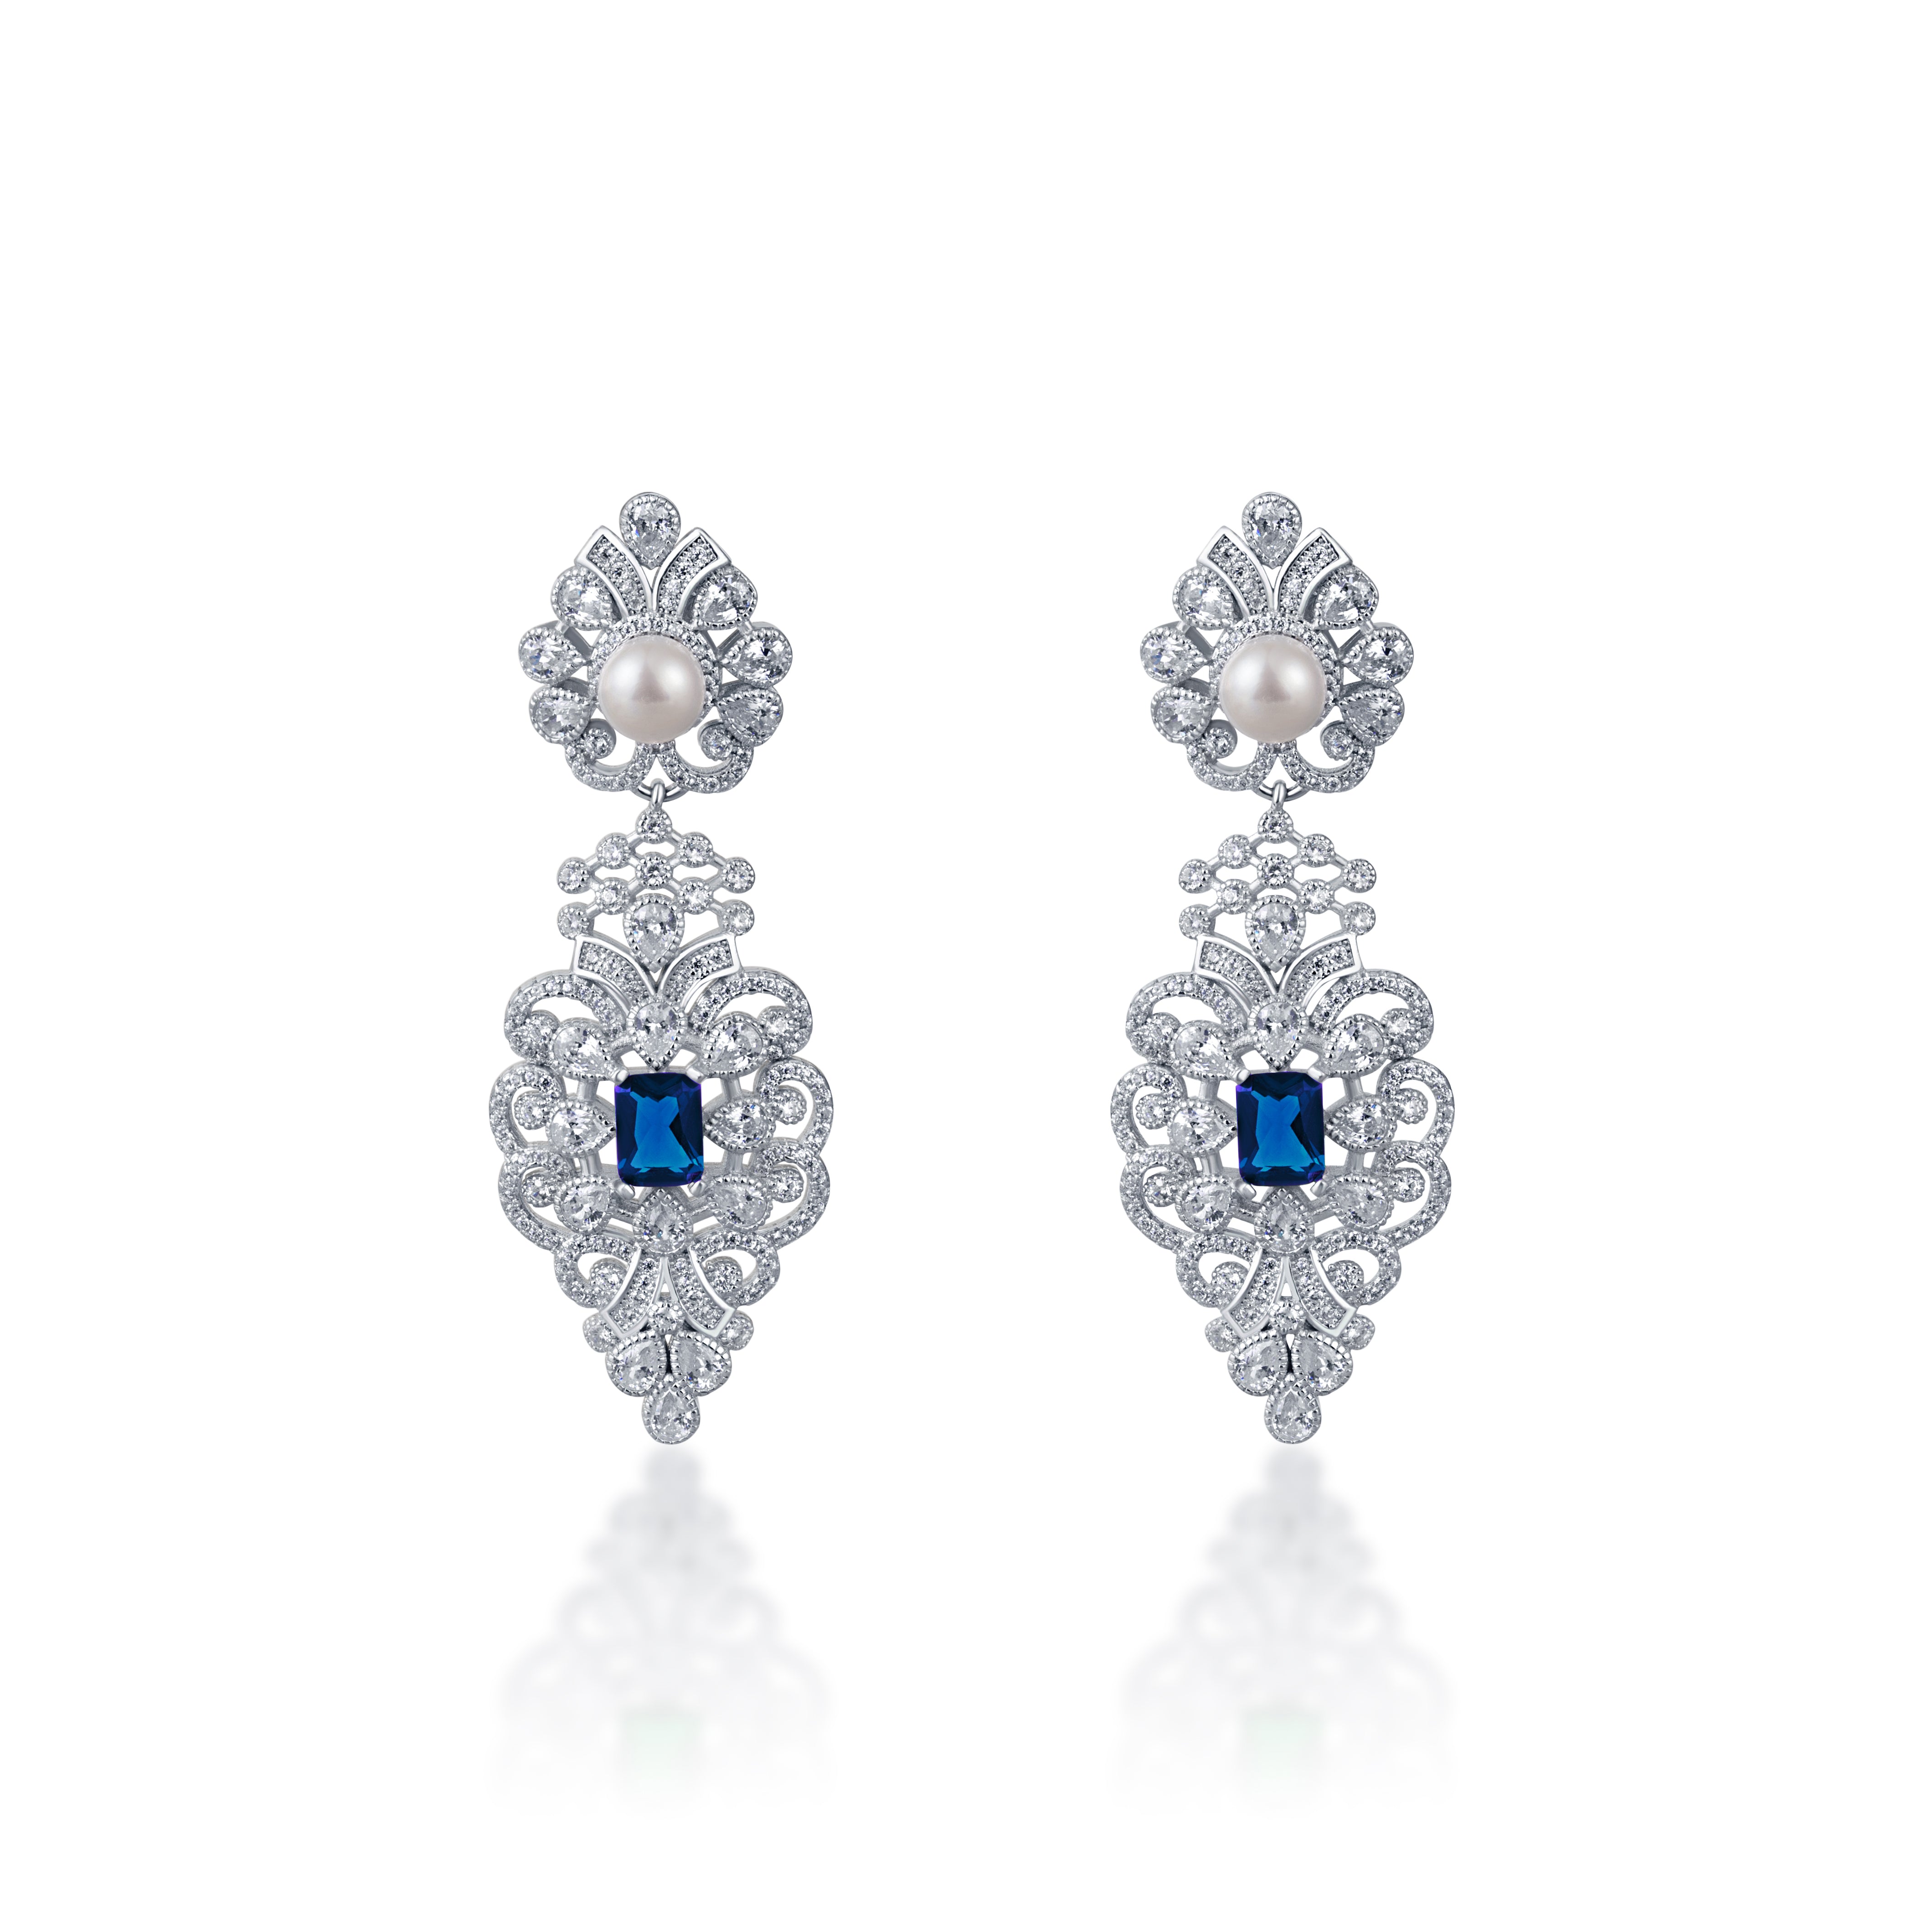 92.5 sterling silver chandelier earring embedded with blue stone, sparkling zirconias and pearls from cocktail range